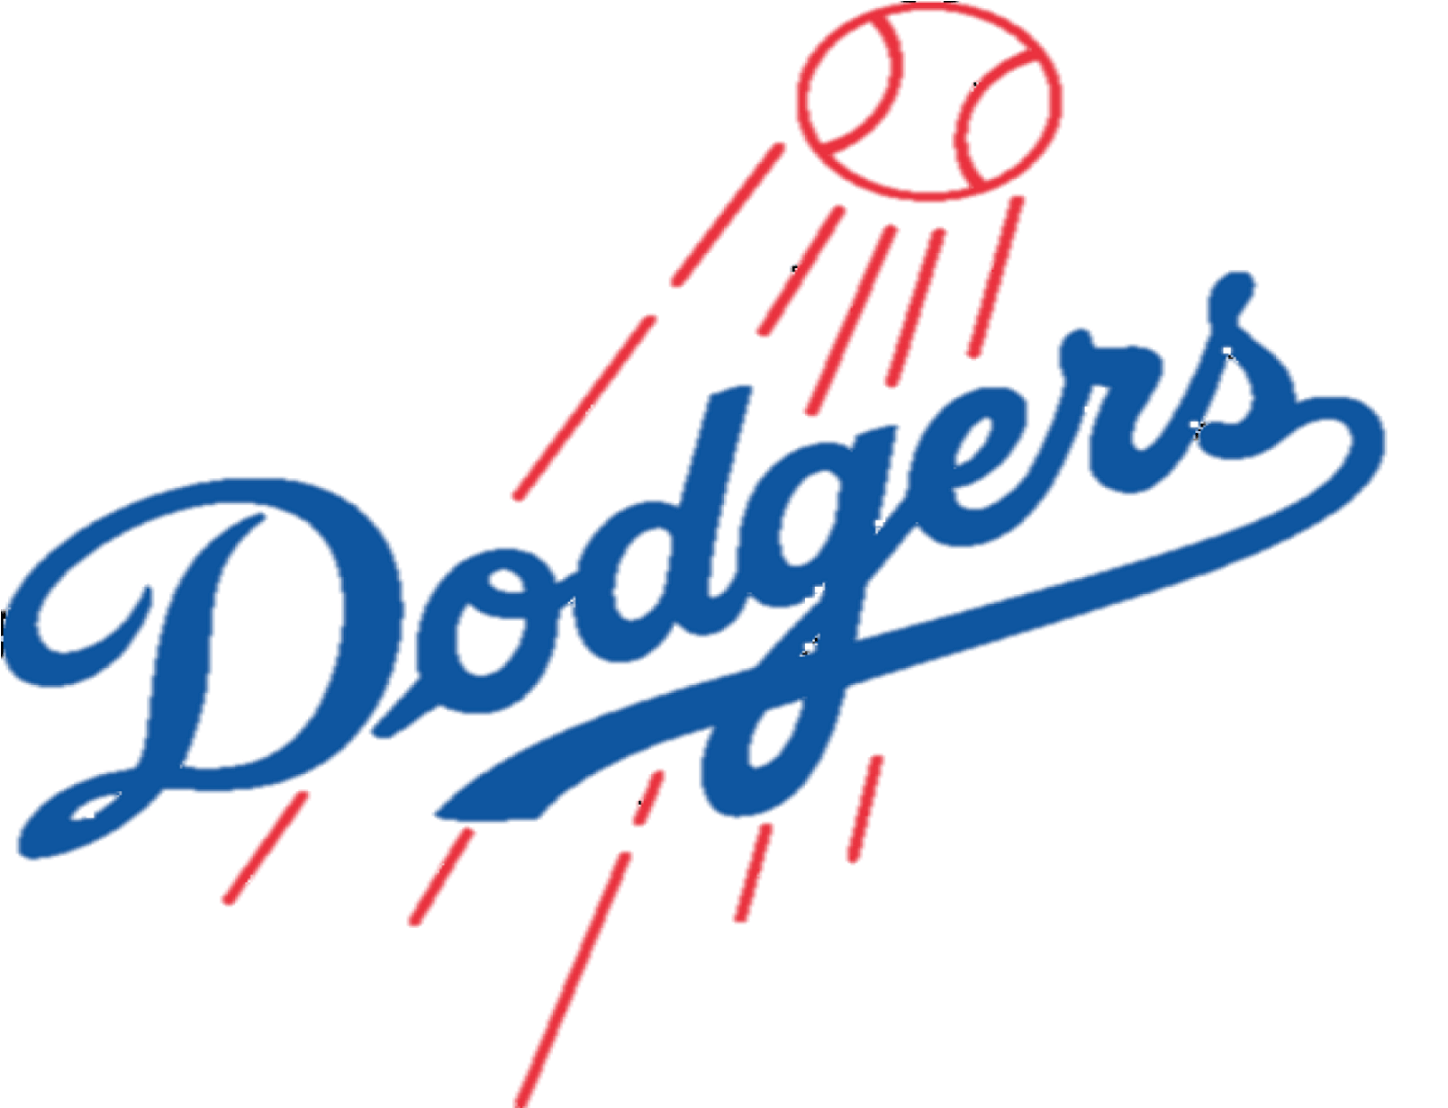 Dodgers Ball Logo - Free Dodgers Cliparts, Download Free Clip Art, Free Clip Art on ...